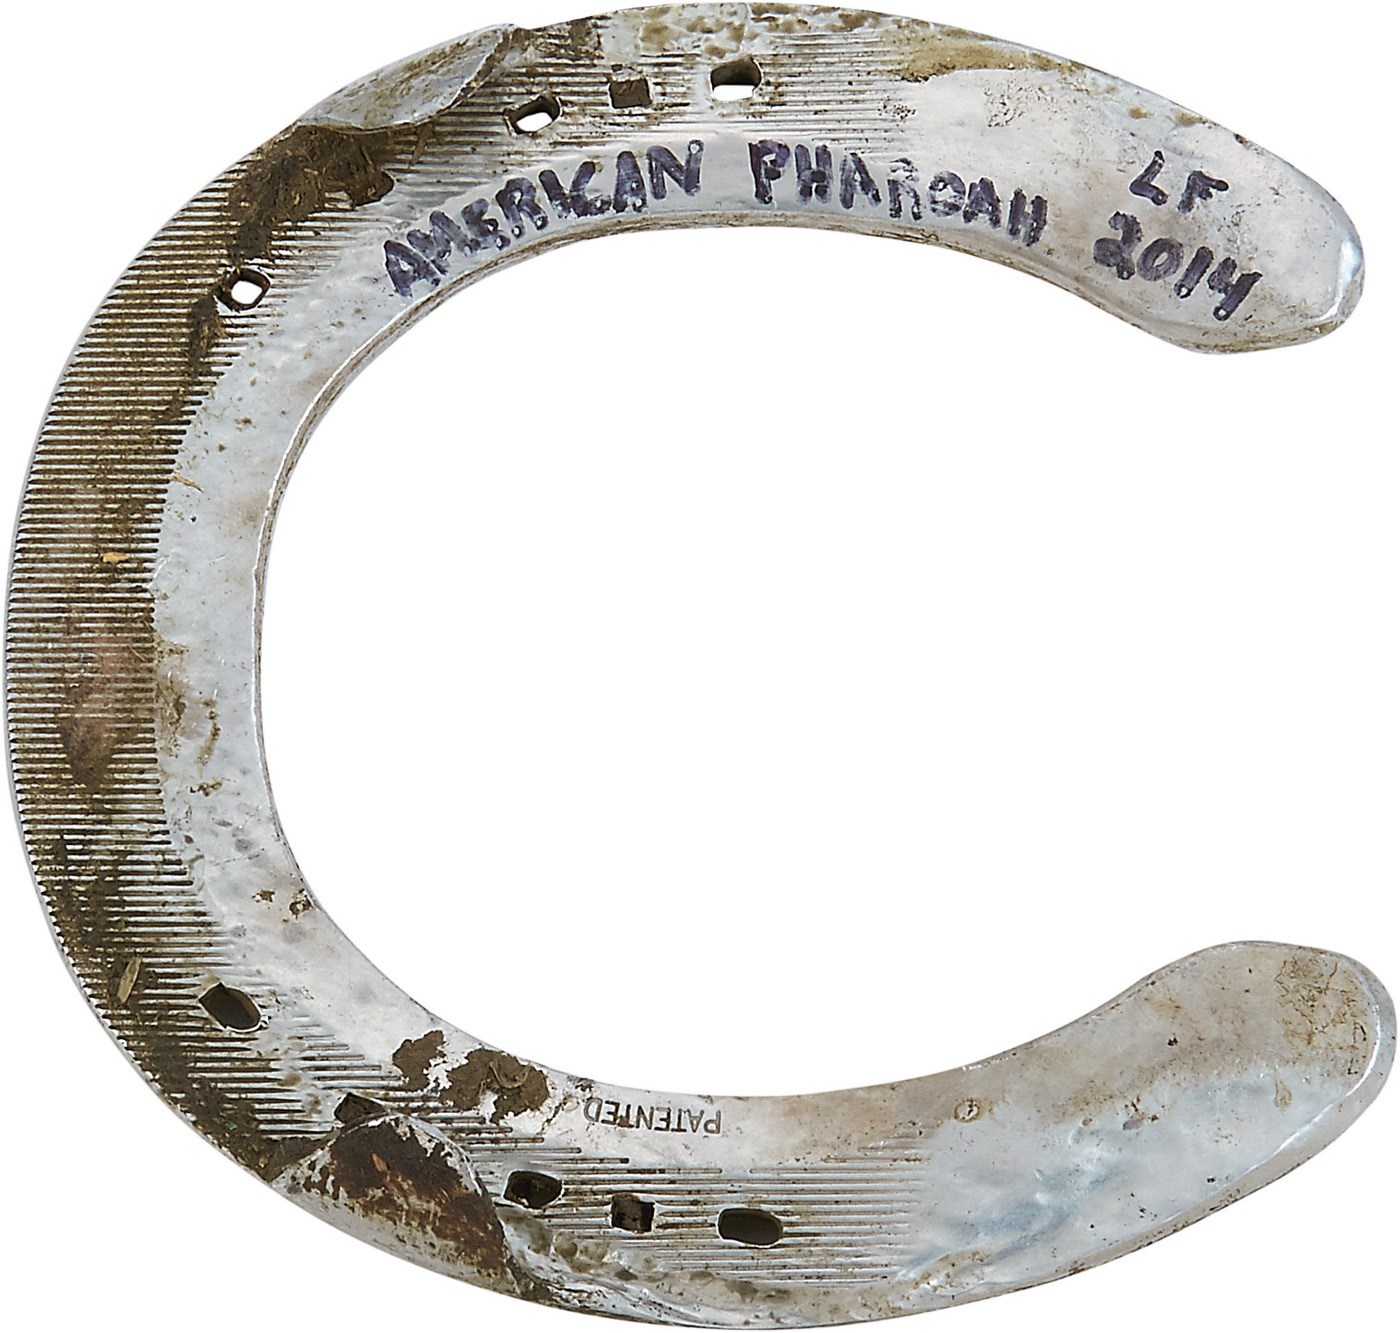 Horse Racing - 2014 American Pharoah Horse Shoe - Sourced from Taylor Made Farms Groomsman